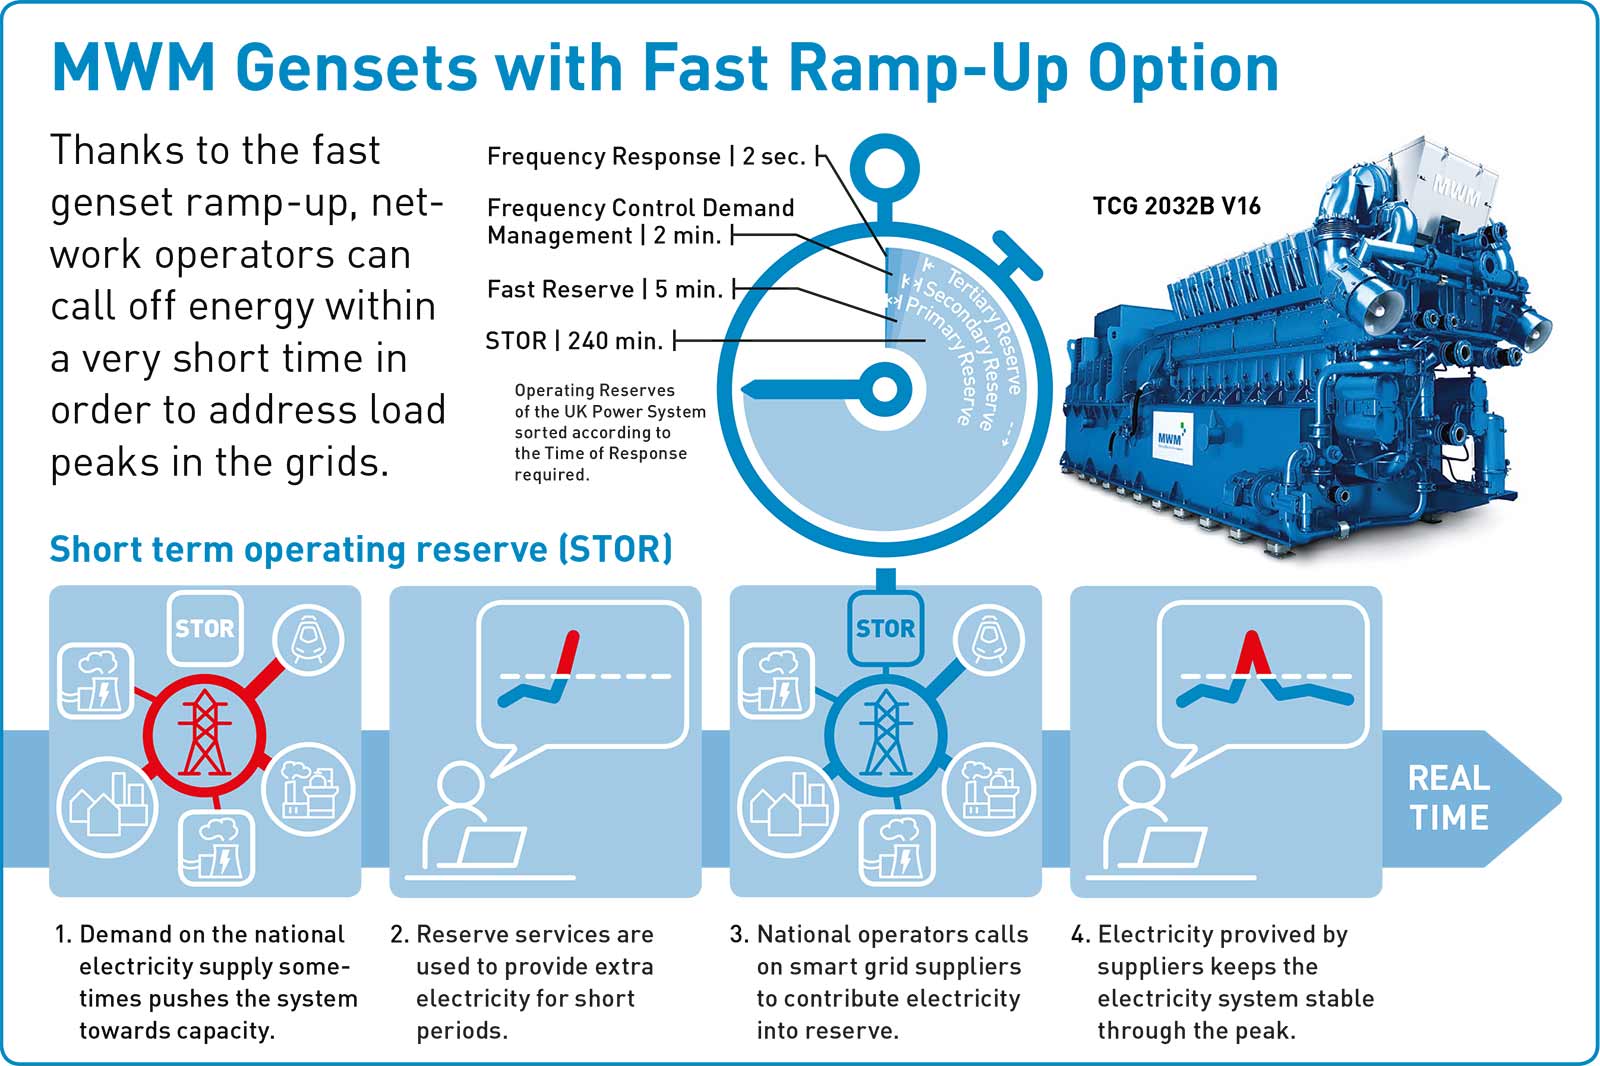 MWM Gensets with Fast Ramp-Up Option